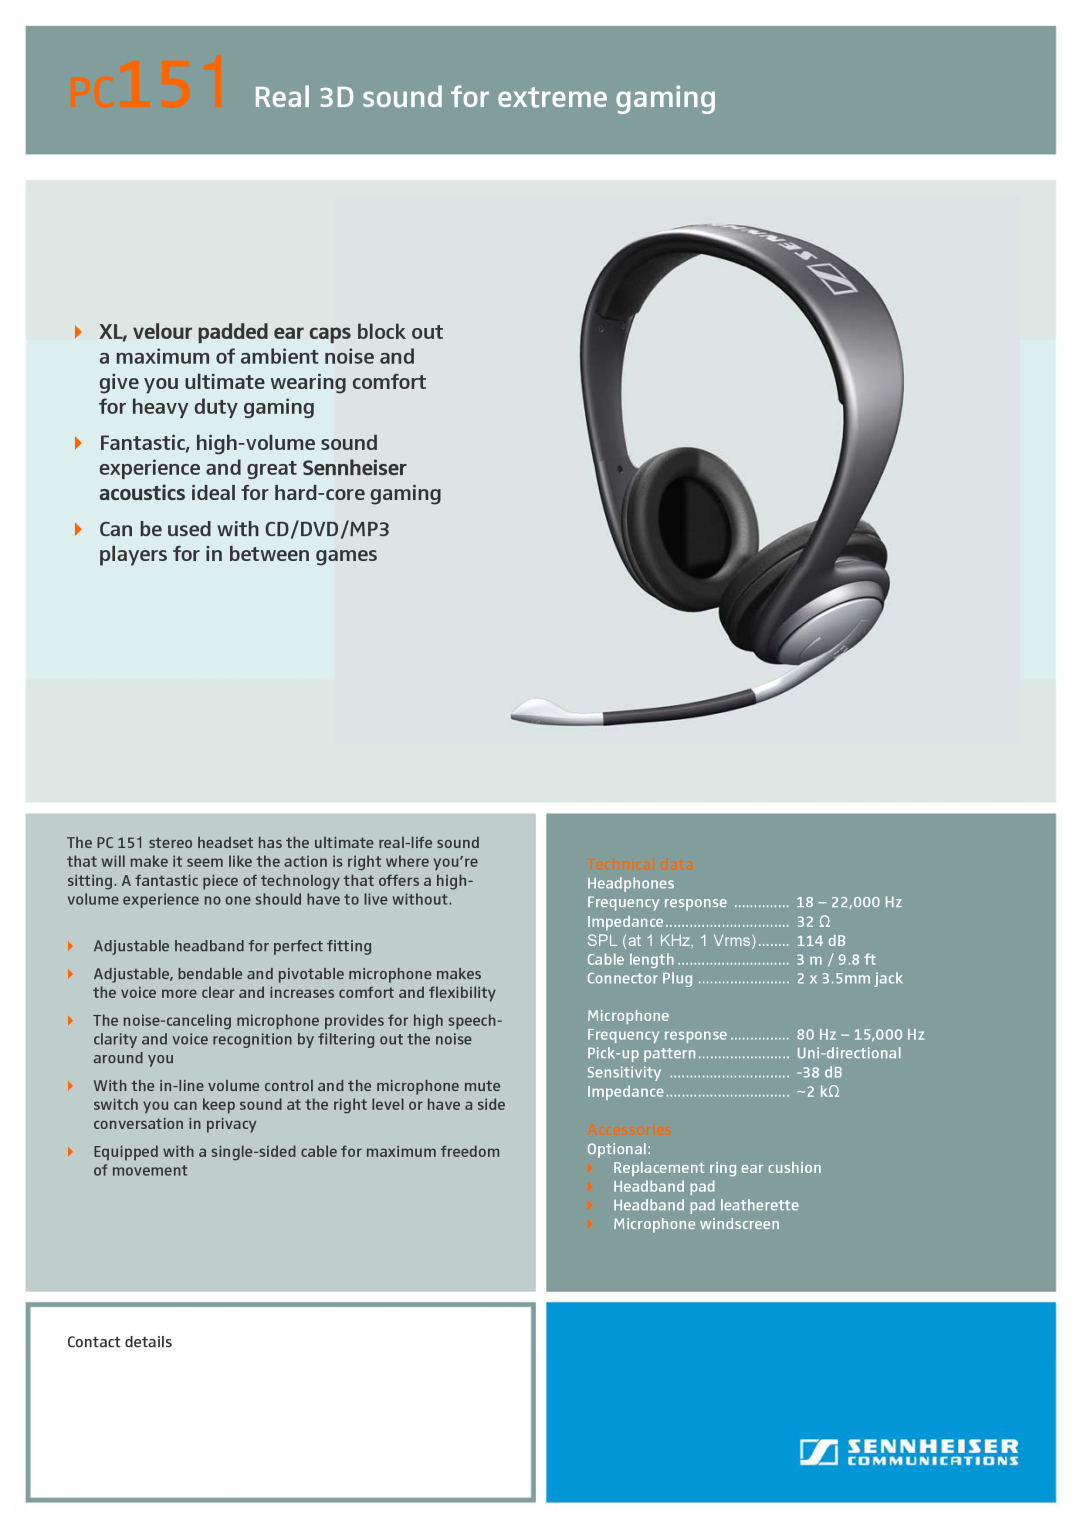 Sennheiser manual PC151 Real 3D sound for extreme gaming, Technical data, Accessories 